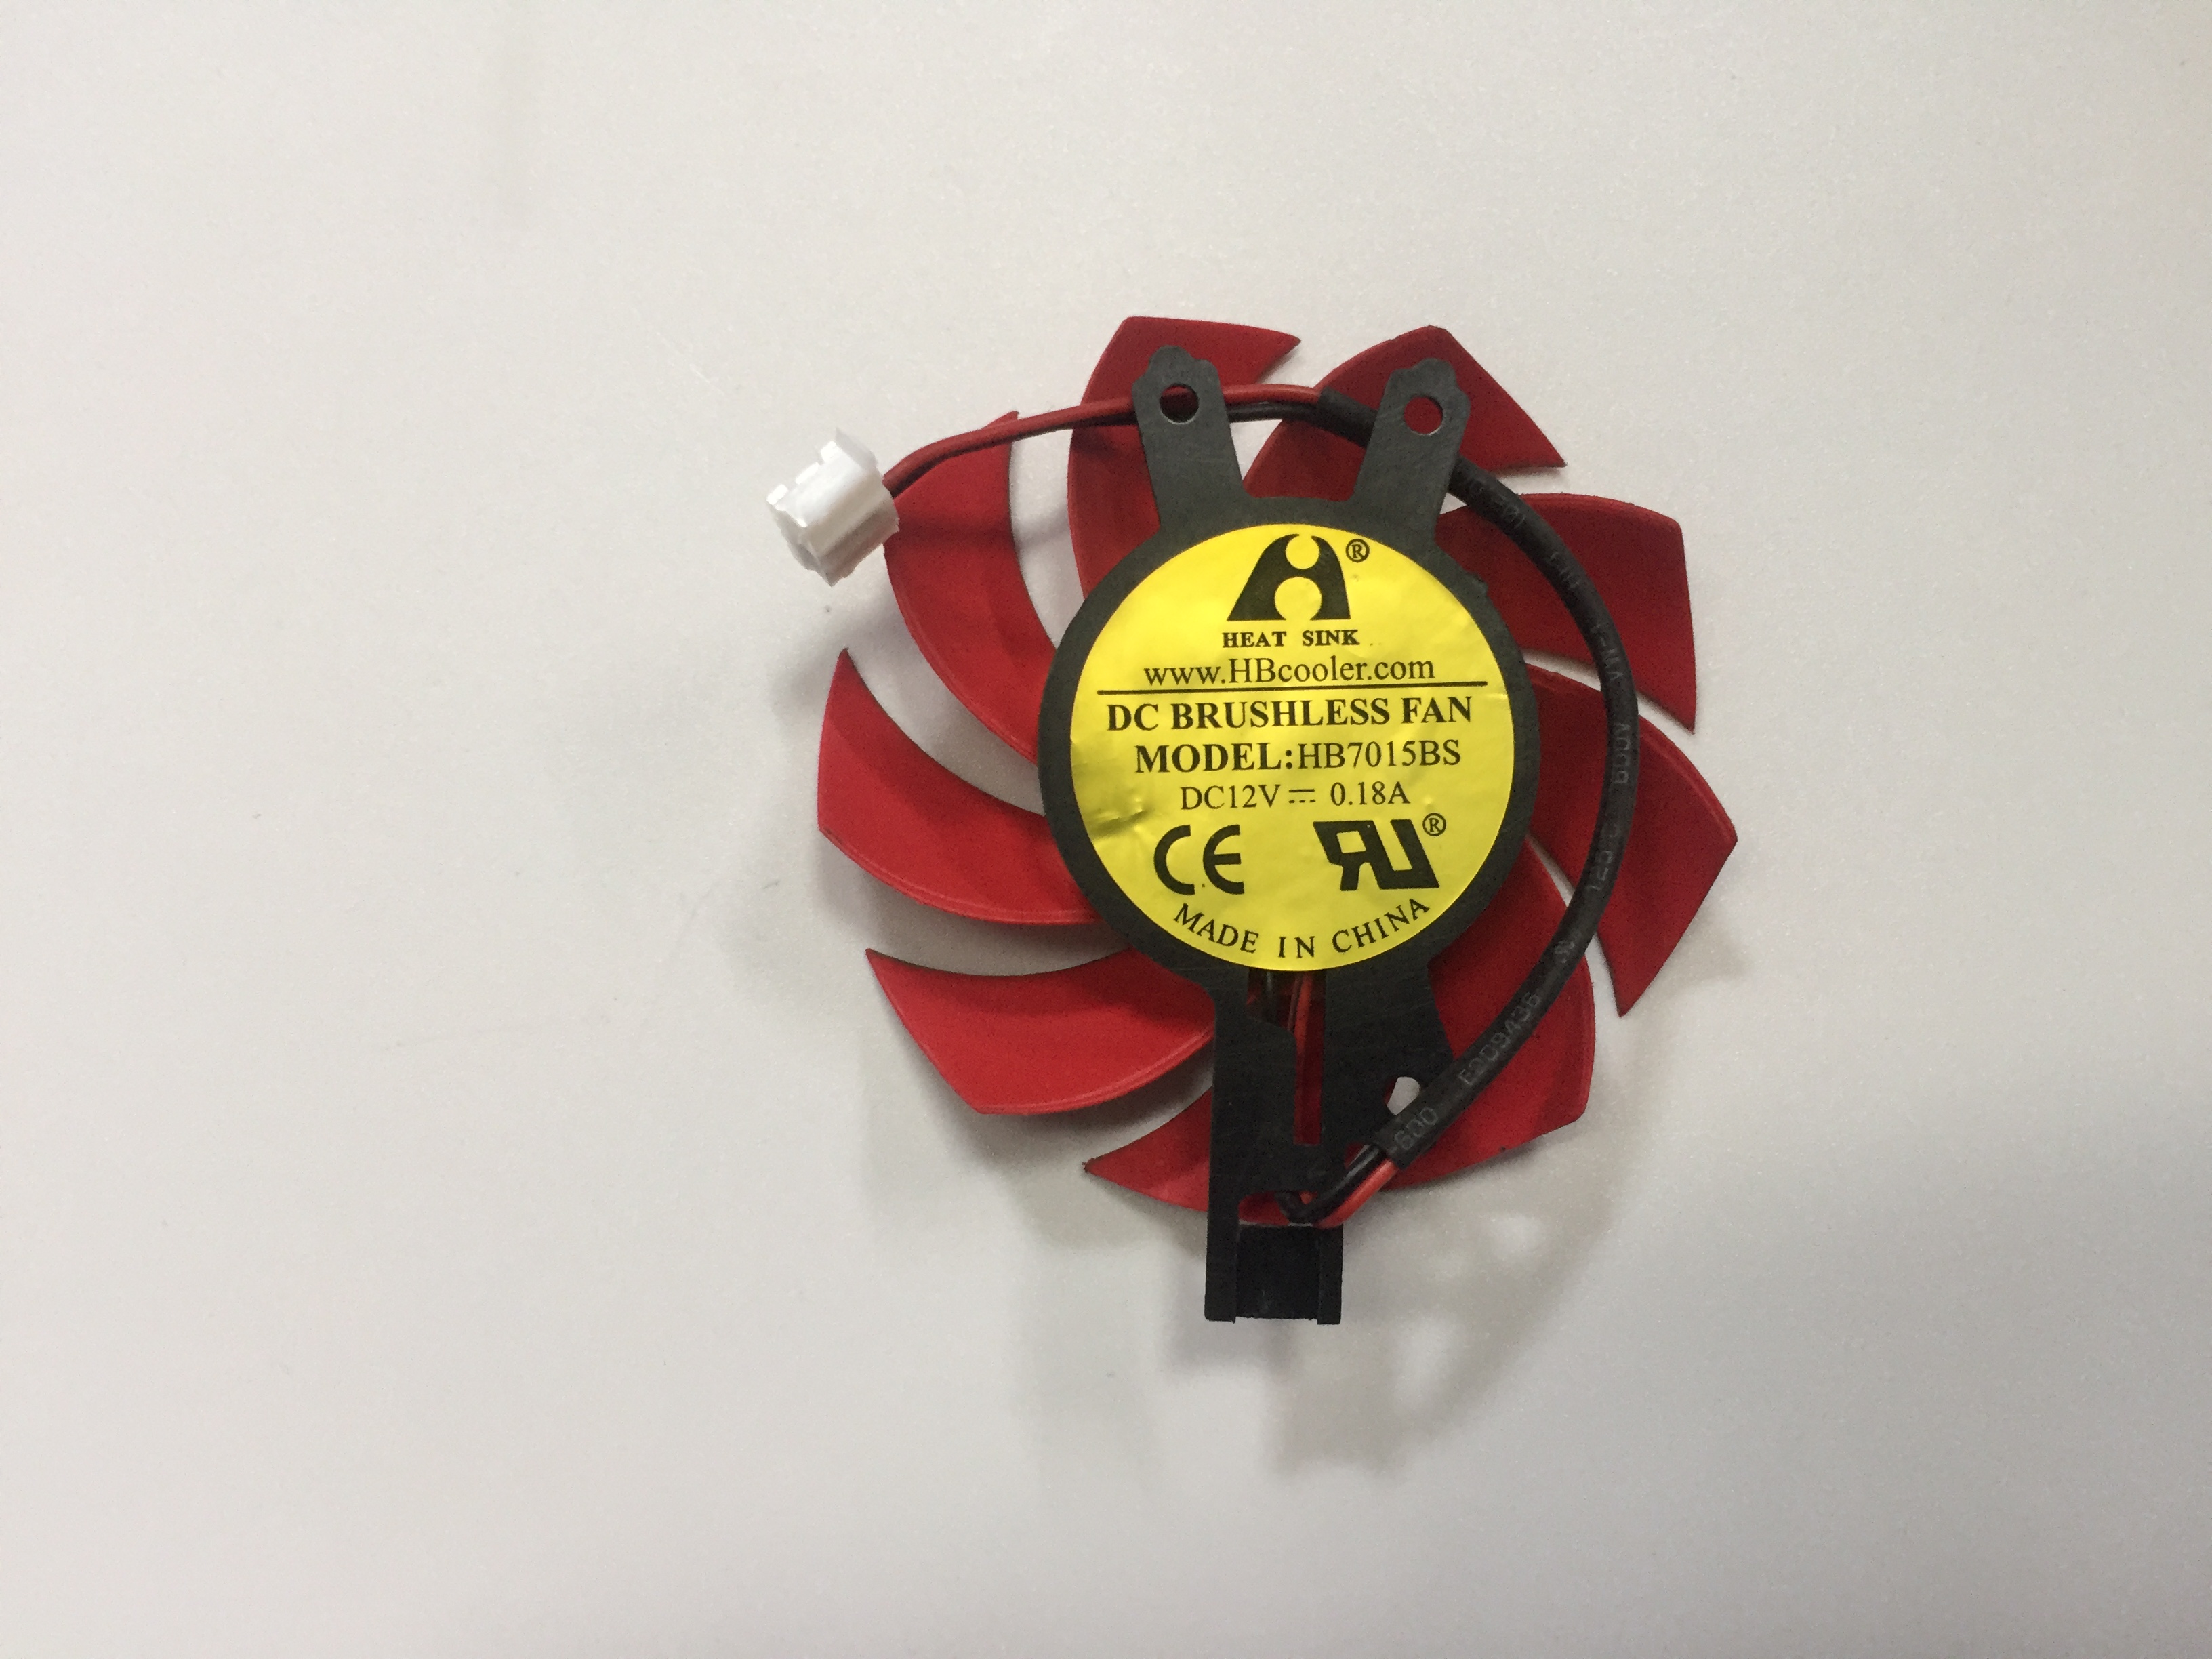 gainward GT630 1GD3 HB7015BS DC12V 0.18A 2Wire 4Pin Graphics Card Cooling Fan